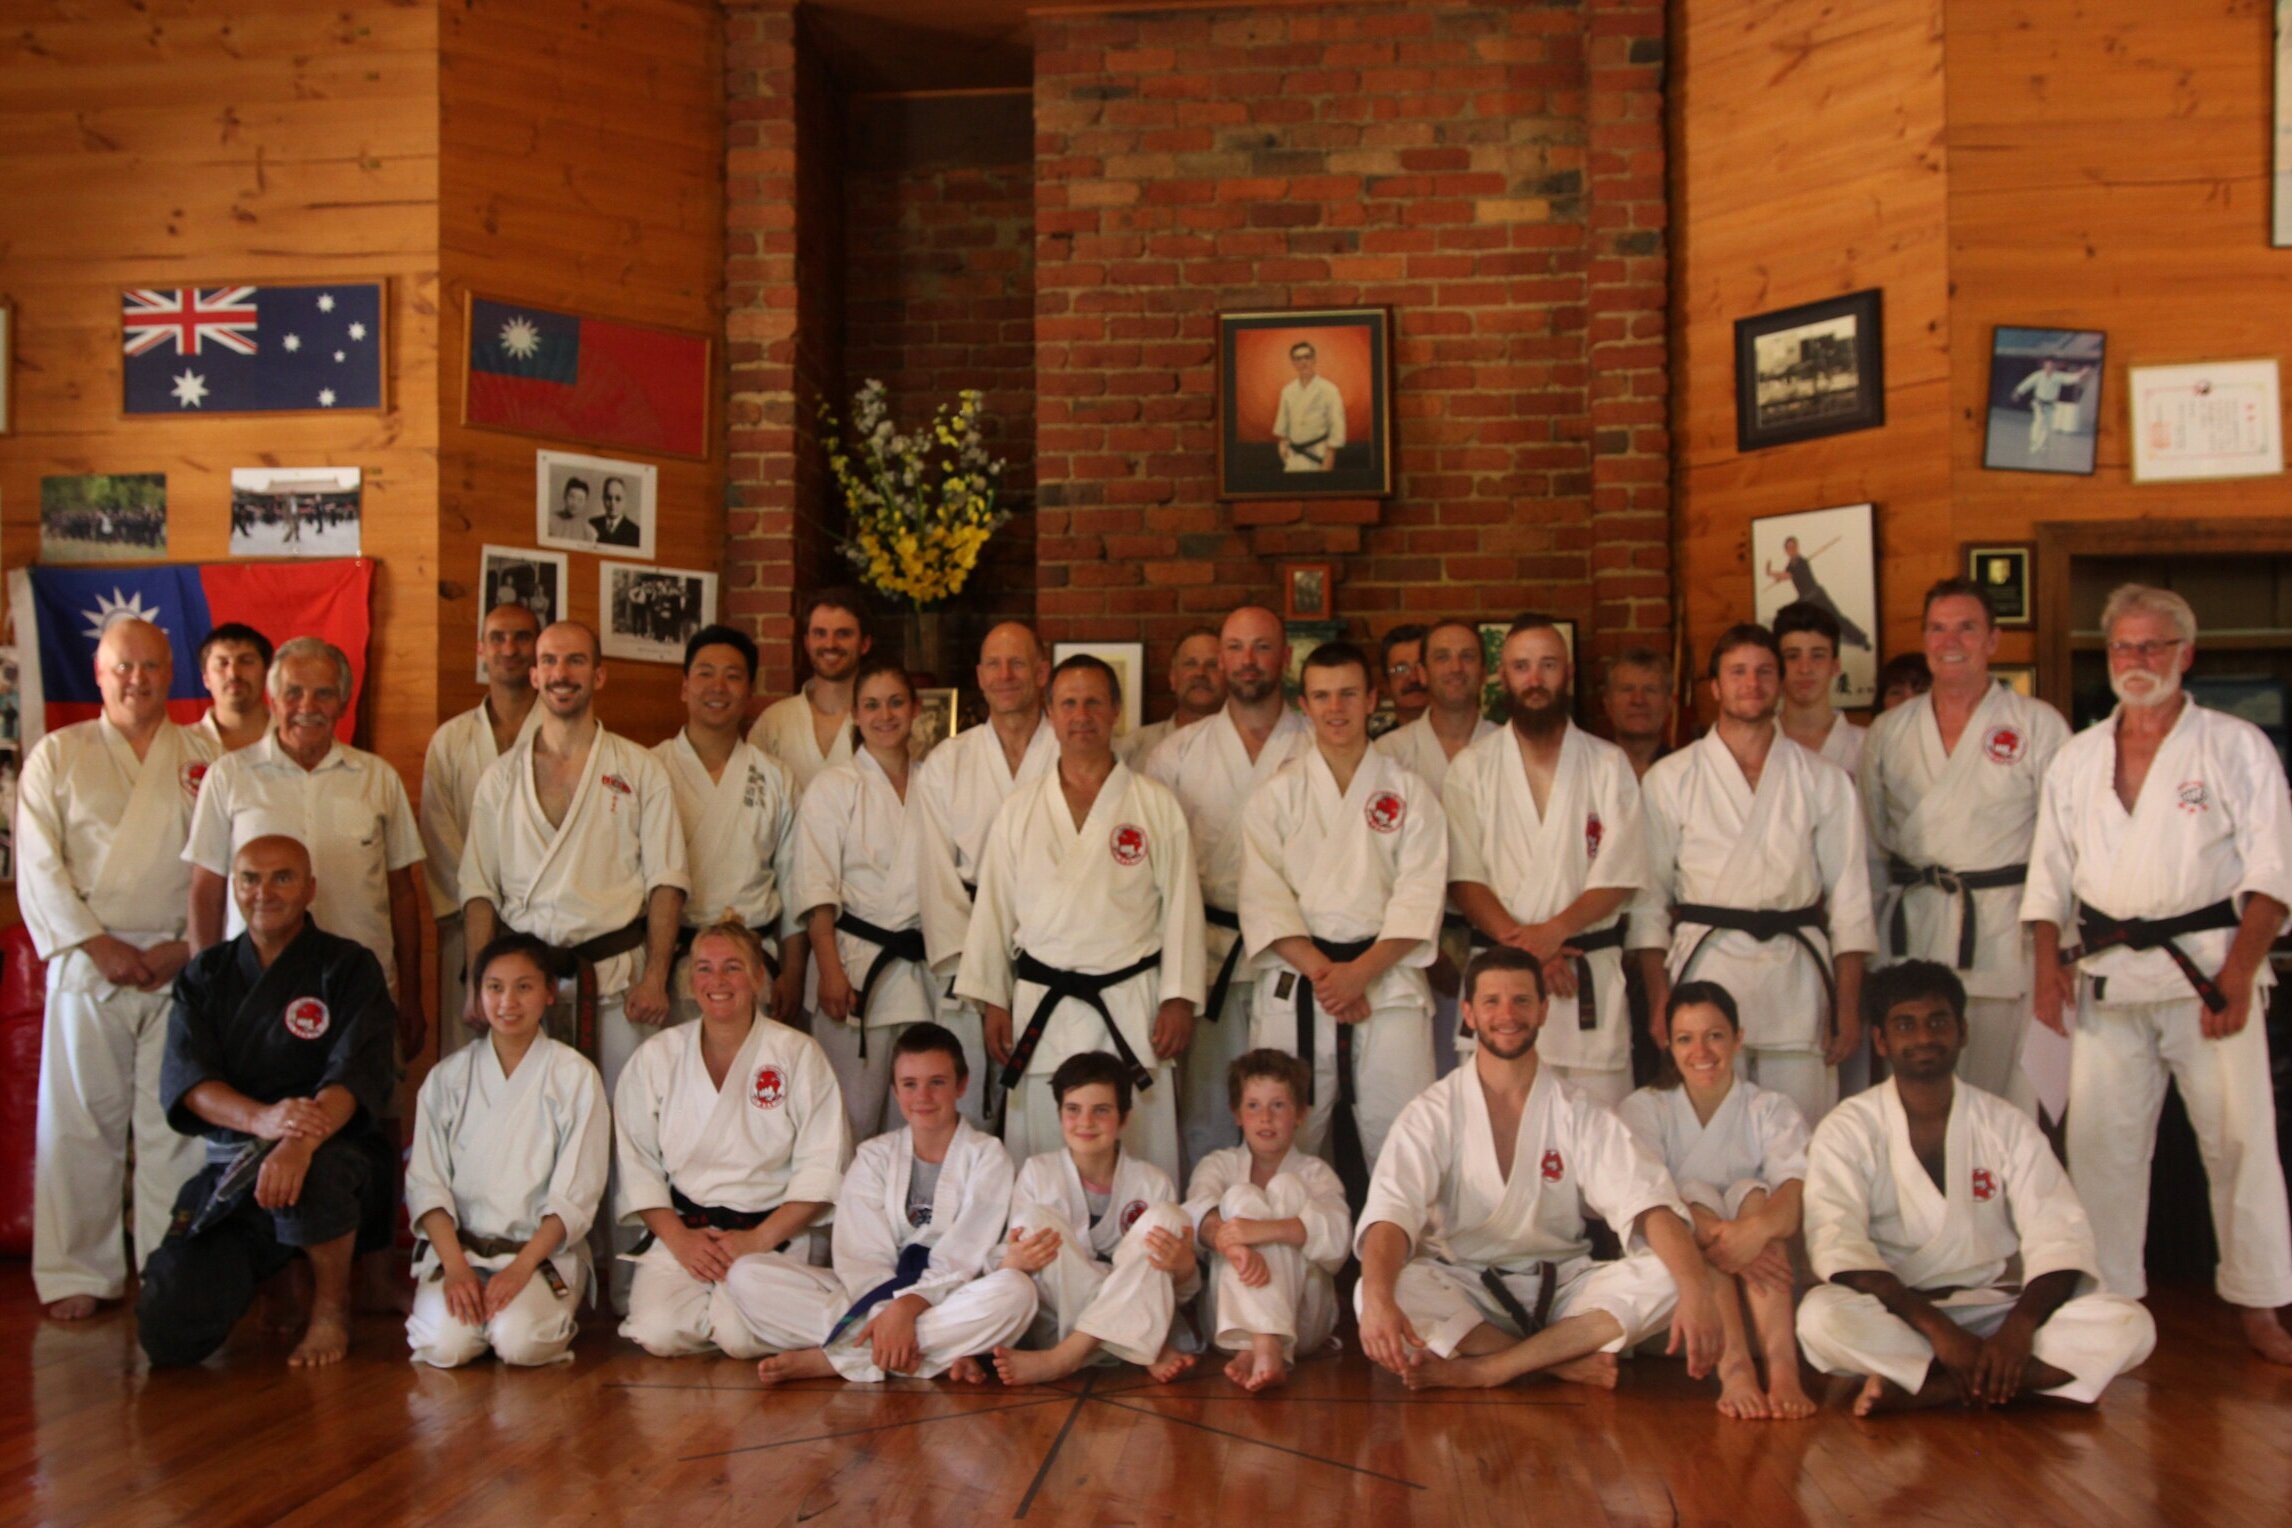 Karate Community Camp with lots of karate participants